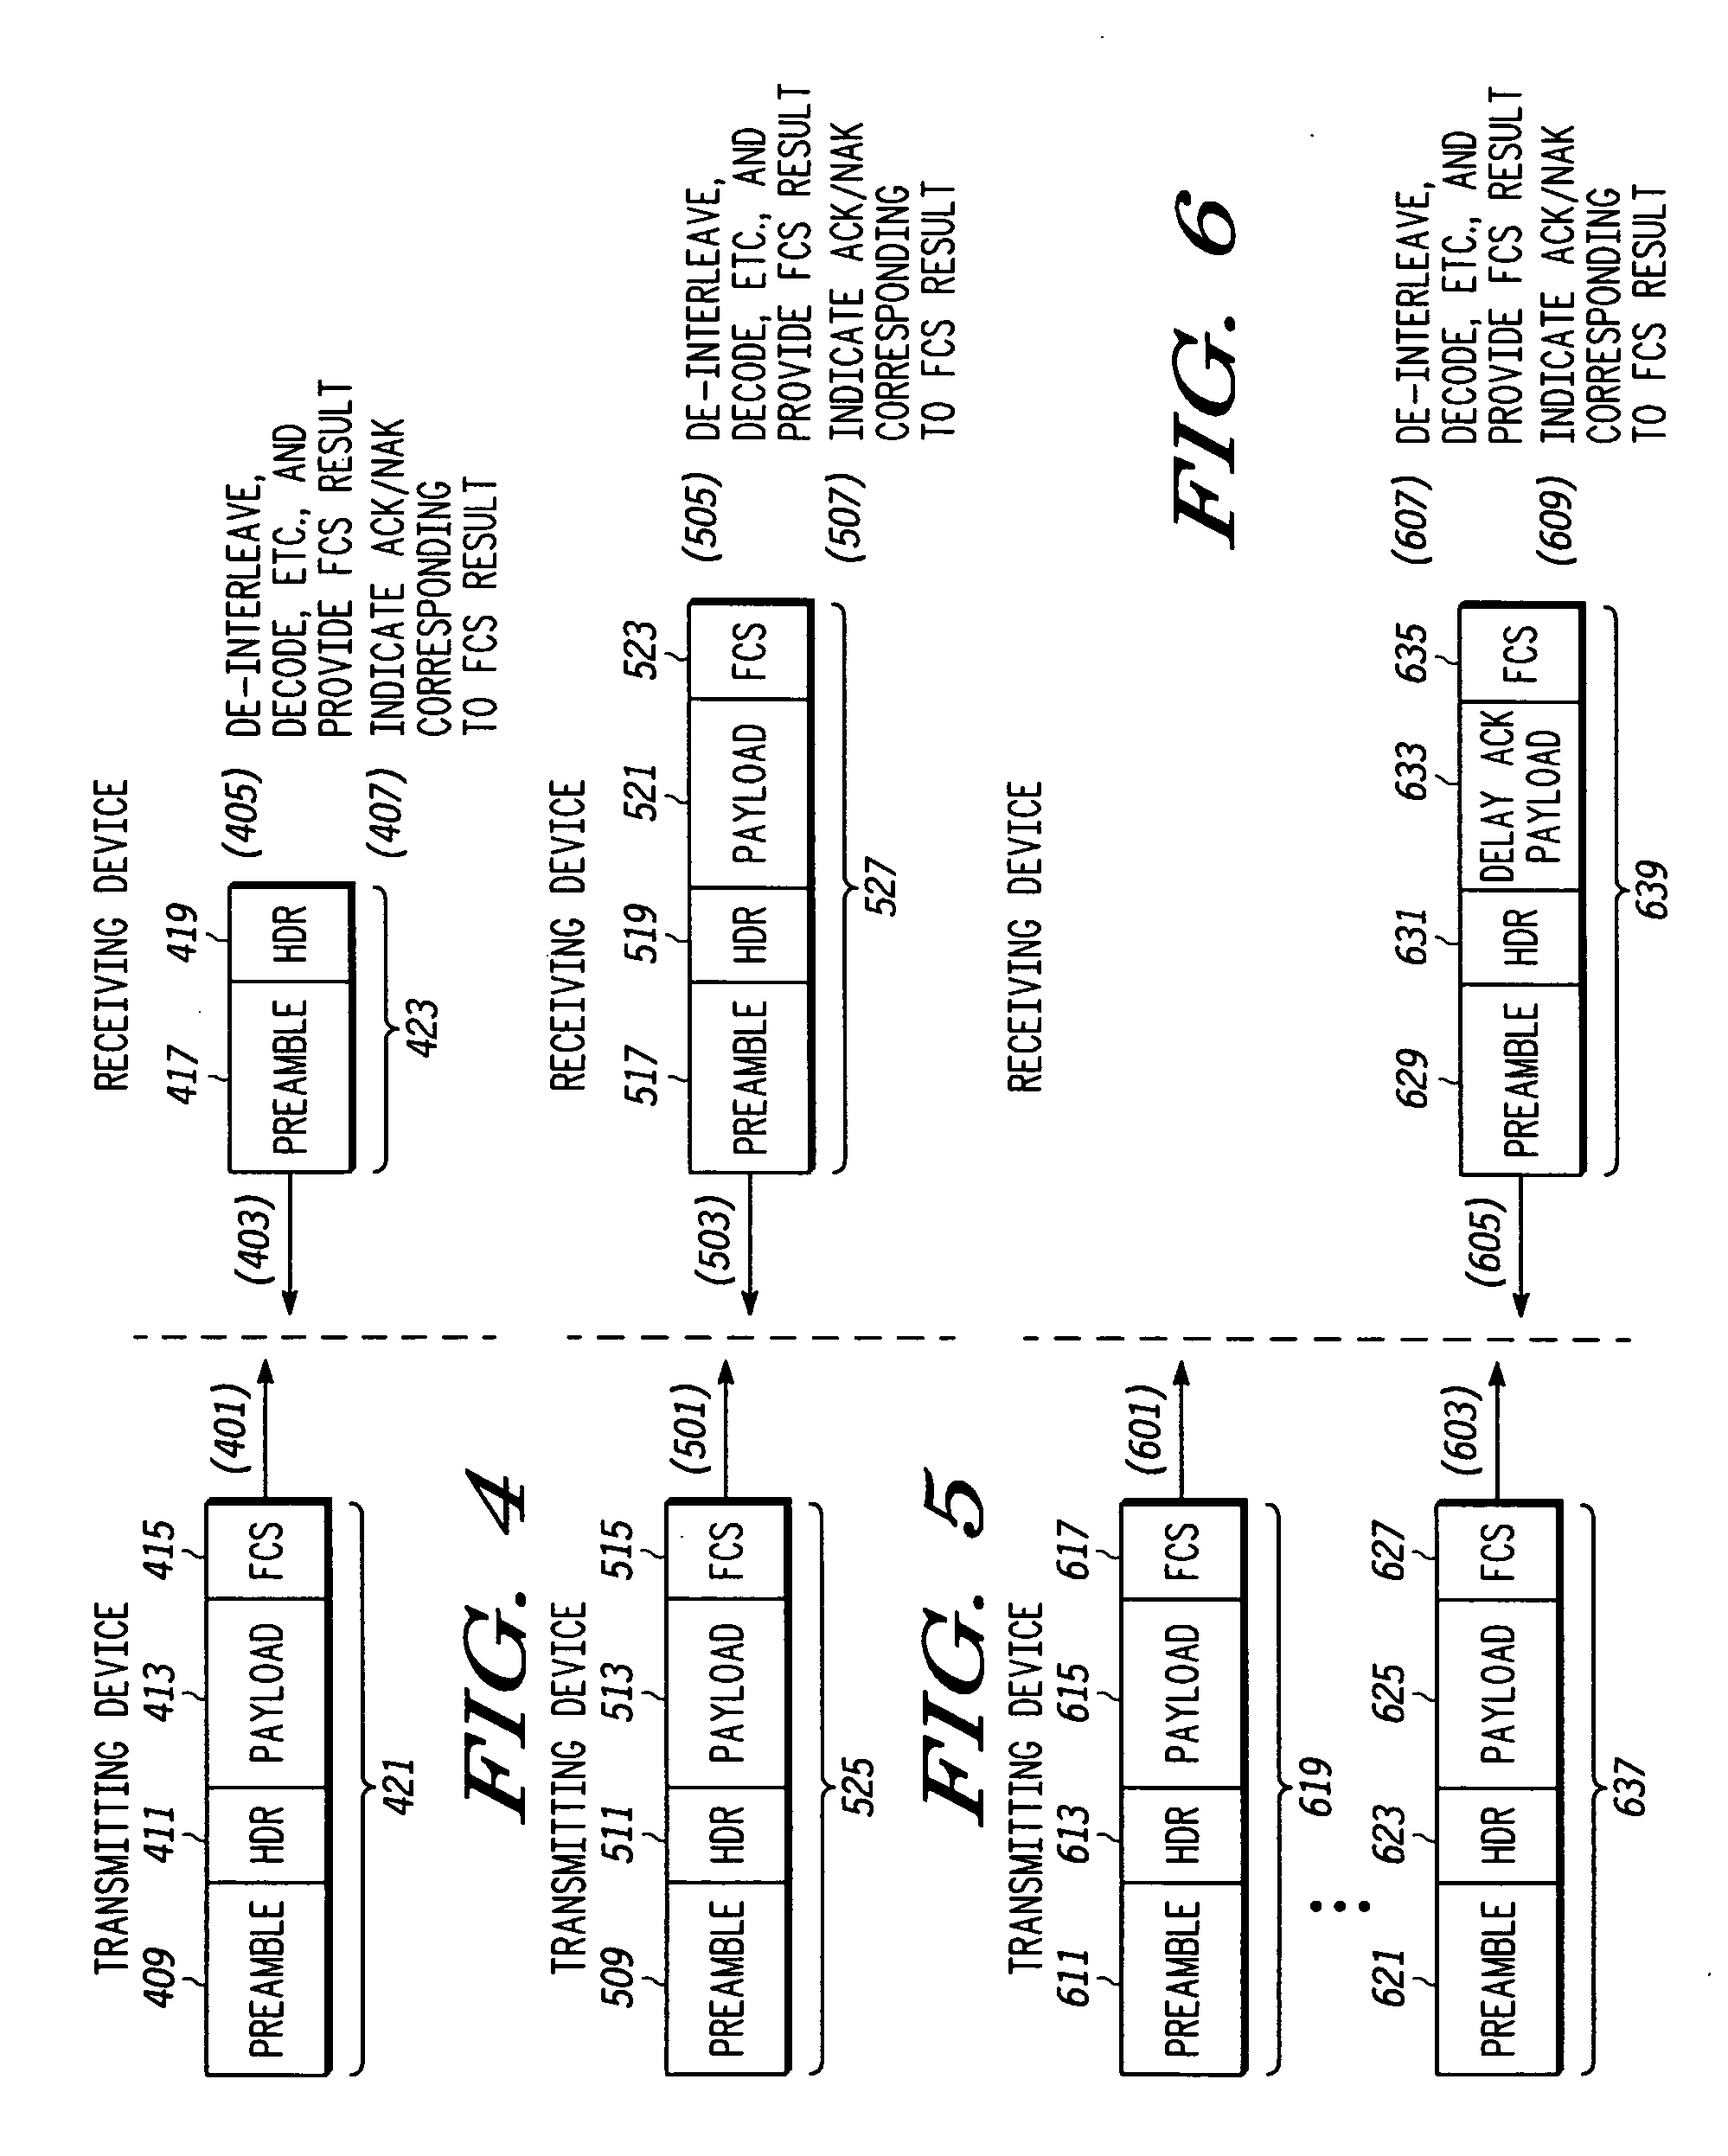 Method and system for acknowledging frames in a communication network